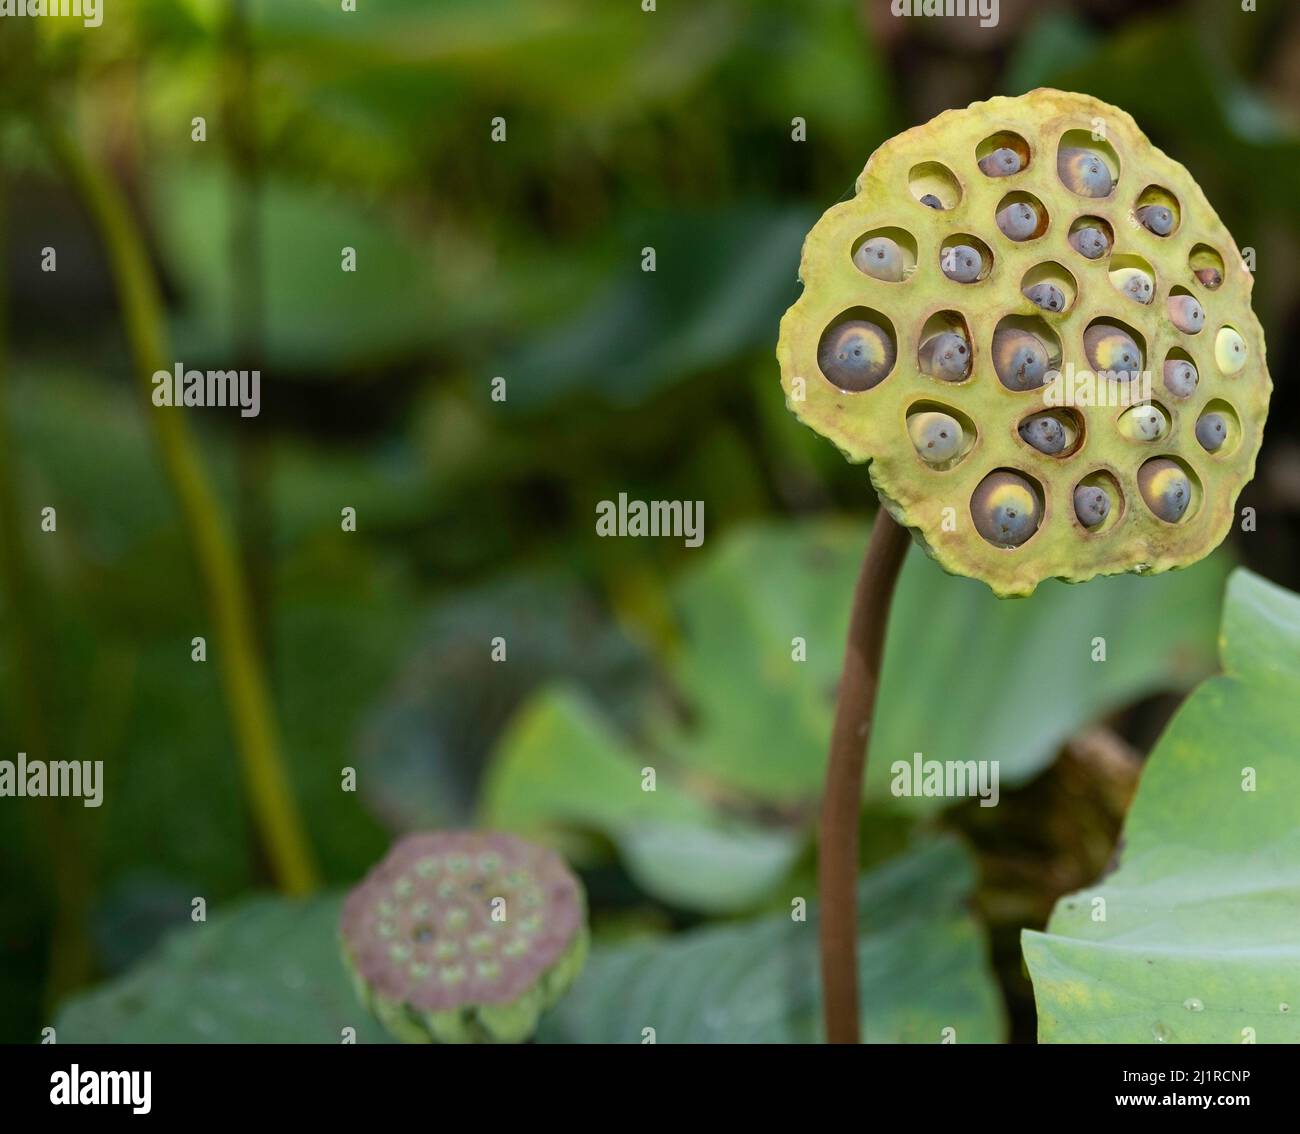 Close up of lotus seed pods with blurred background of another pod and green lotus pads floating in pond Stock Photo